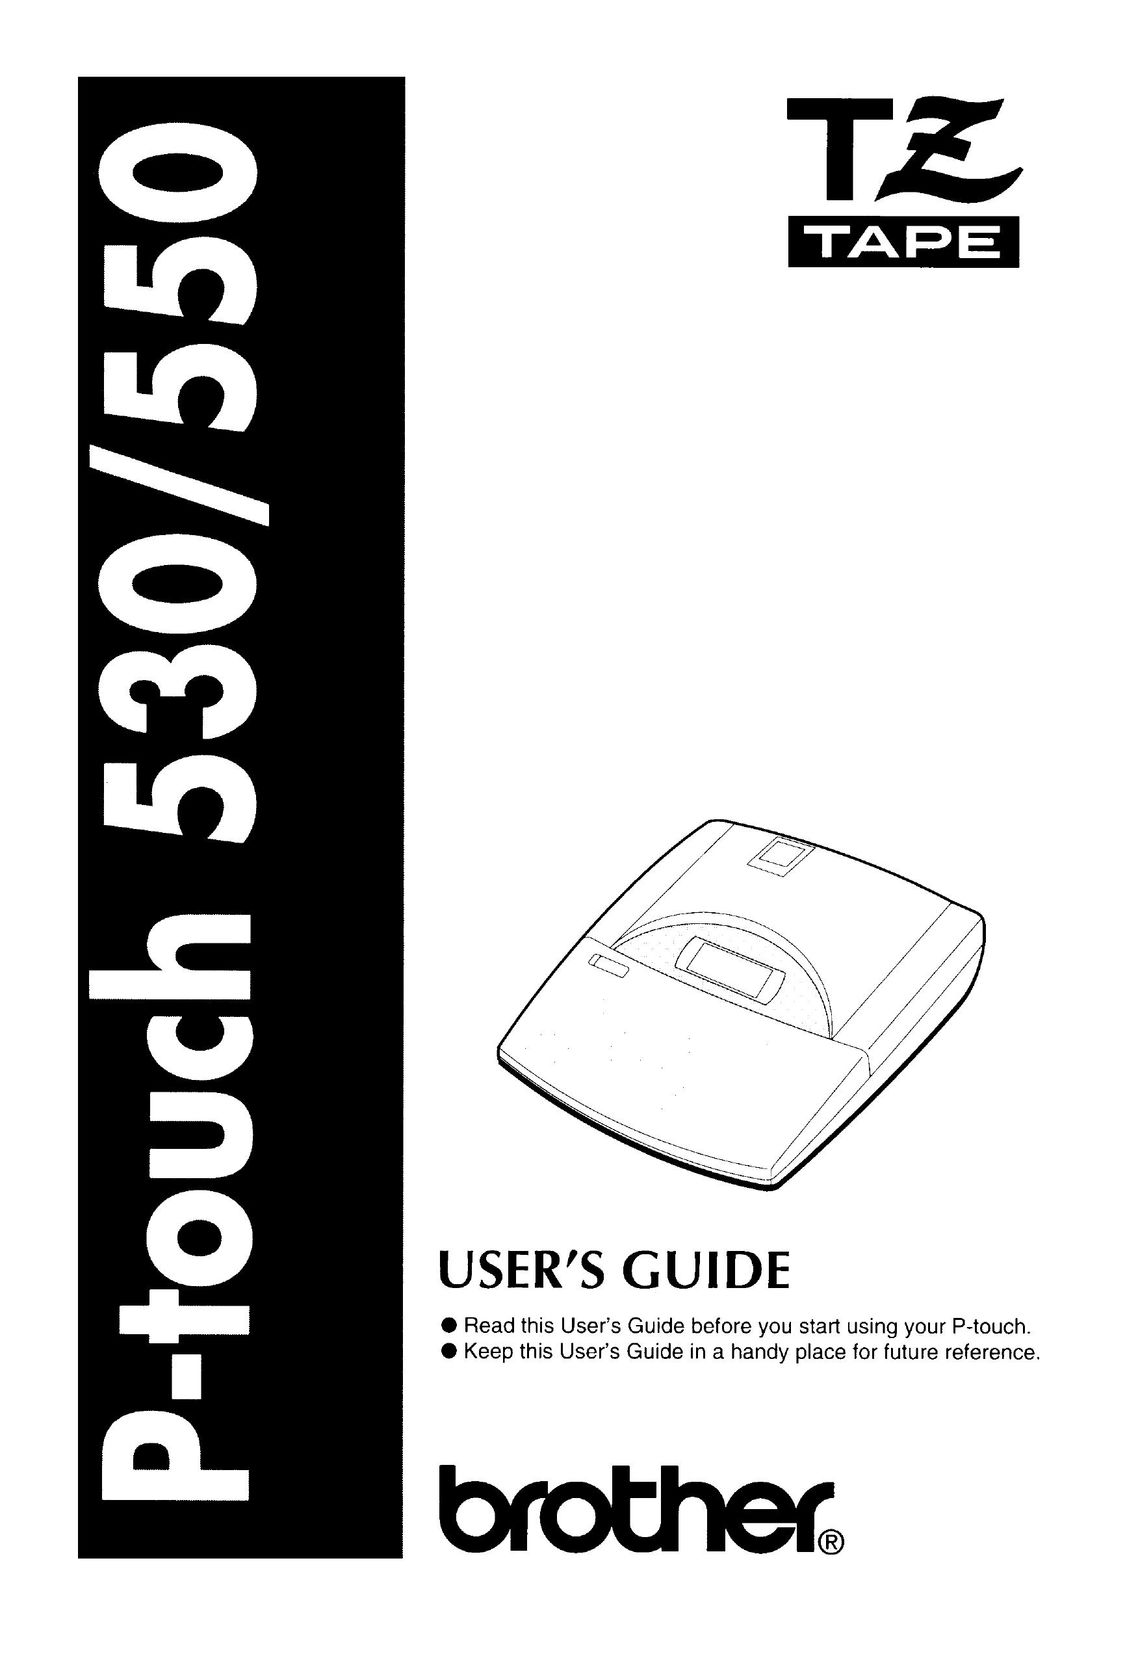 Brother P-touch 550 Cordless Telephone User Manual